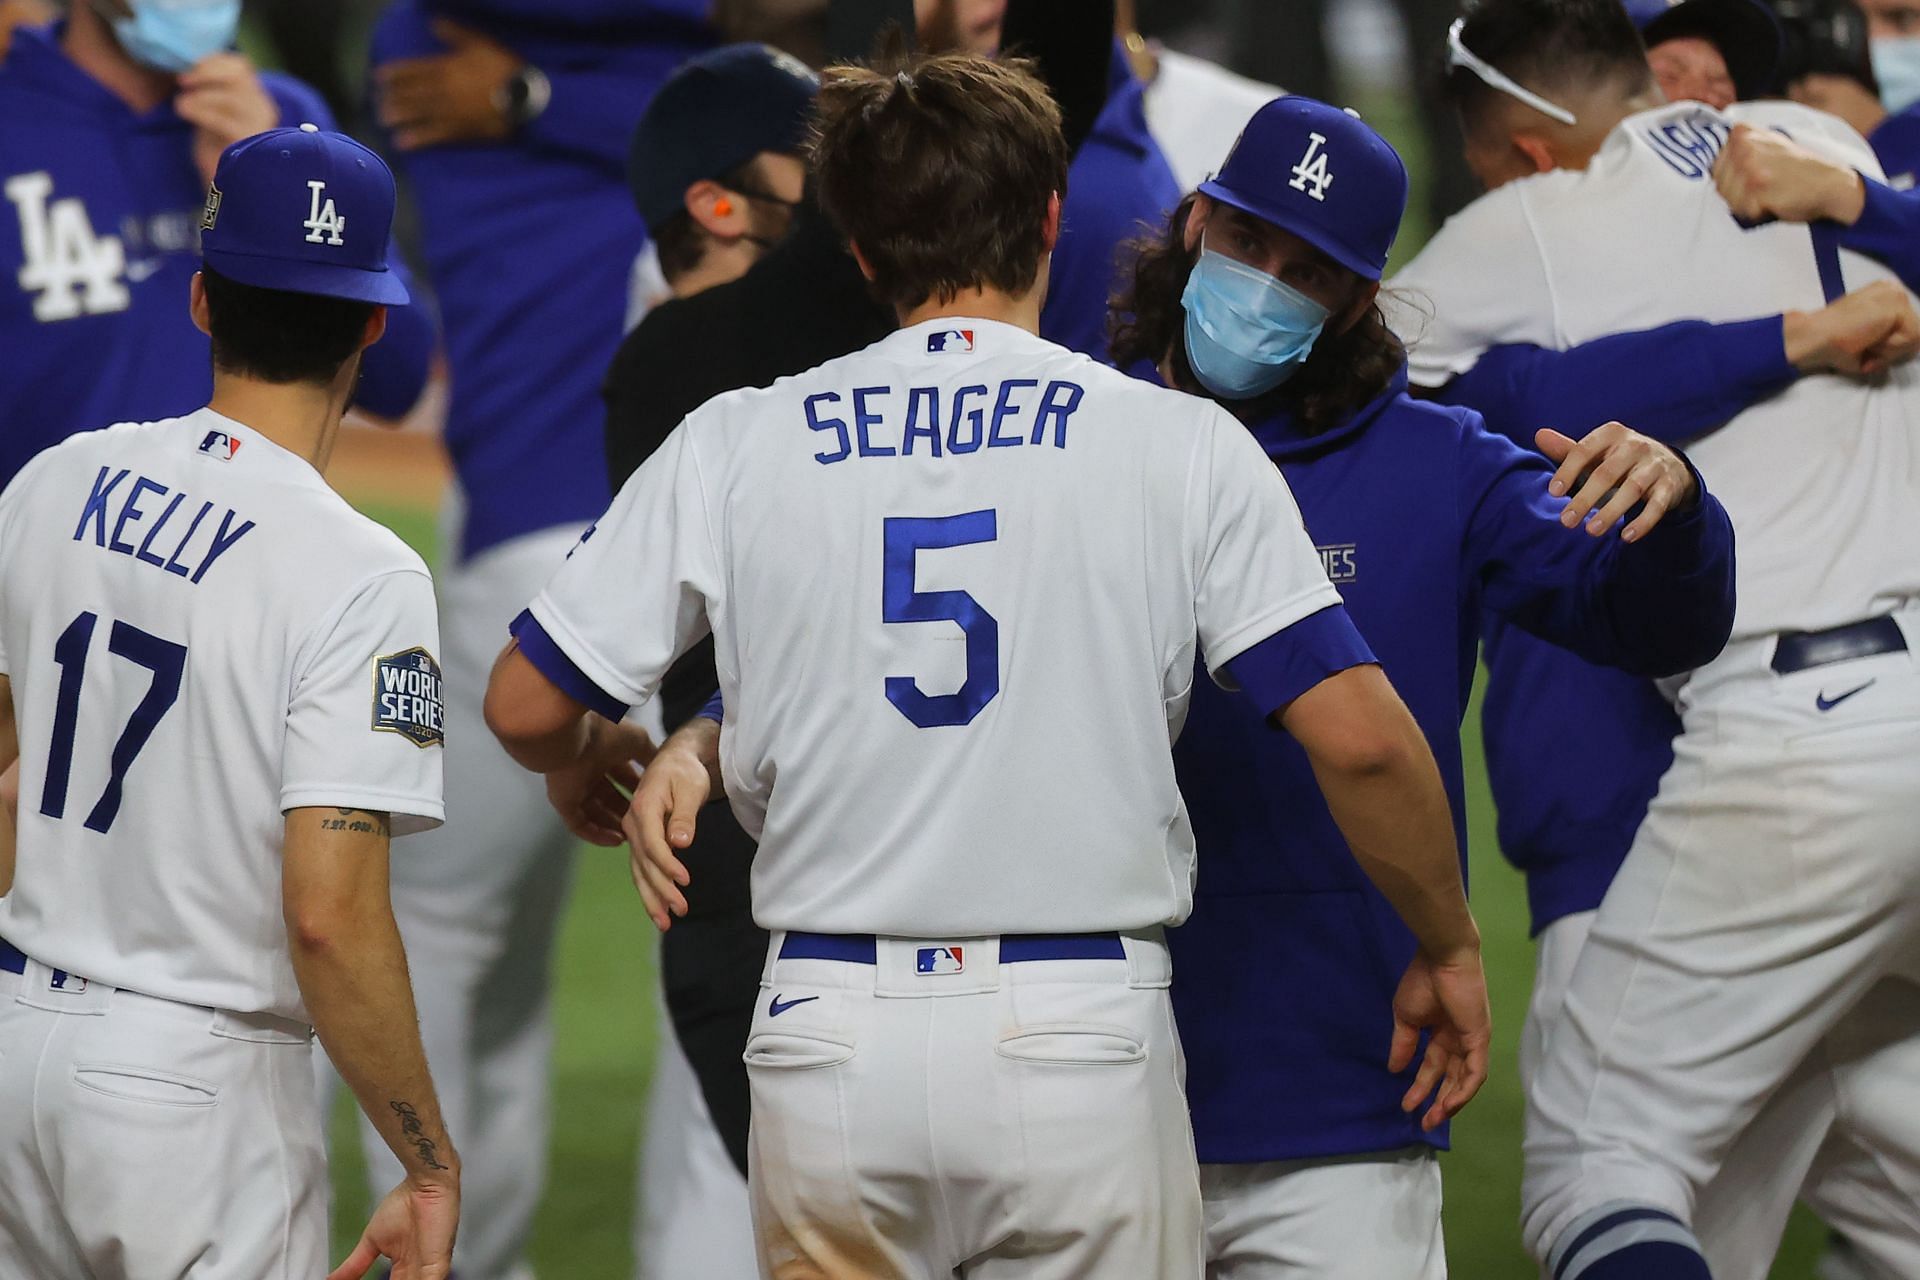 Inside Corey Seager's secret persona and Texas Rangers' success after LA  Dodgers exit - The Mirror US